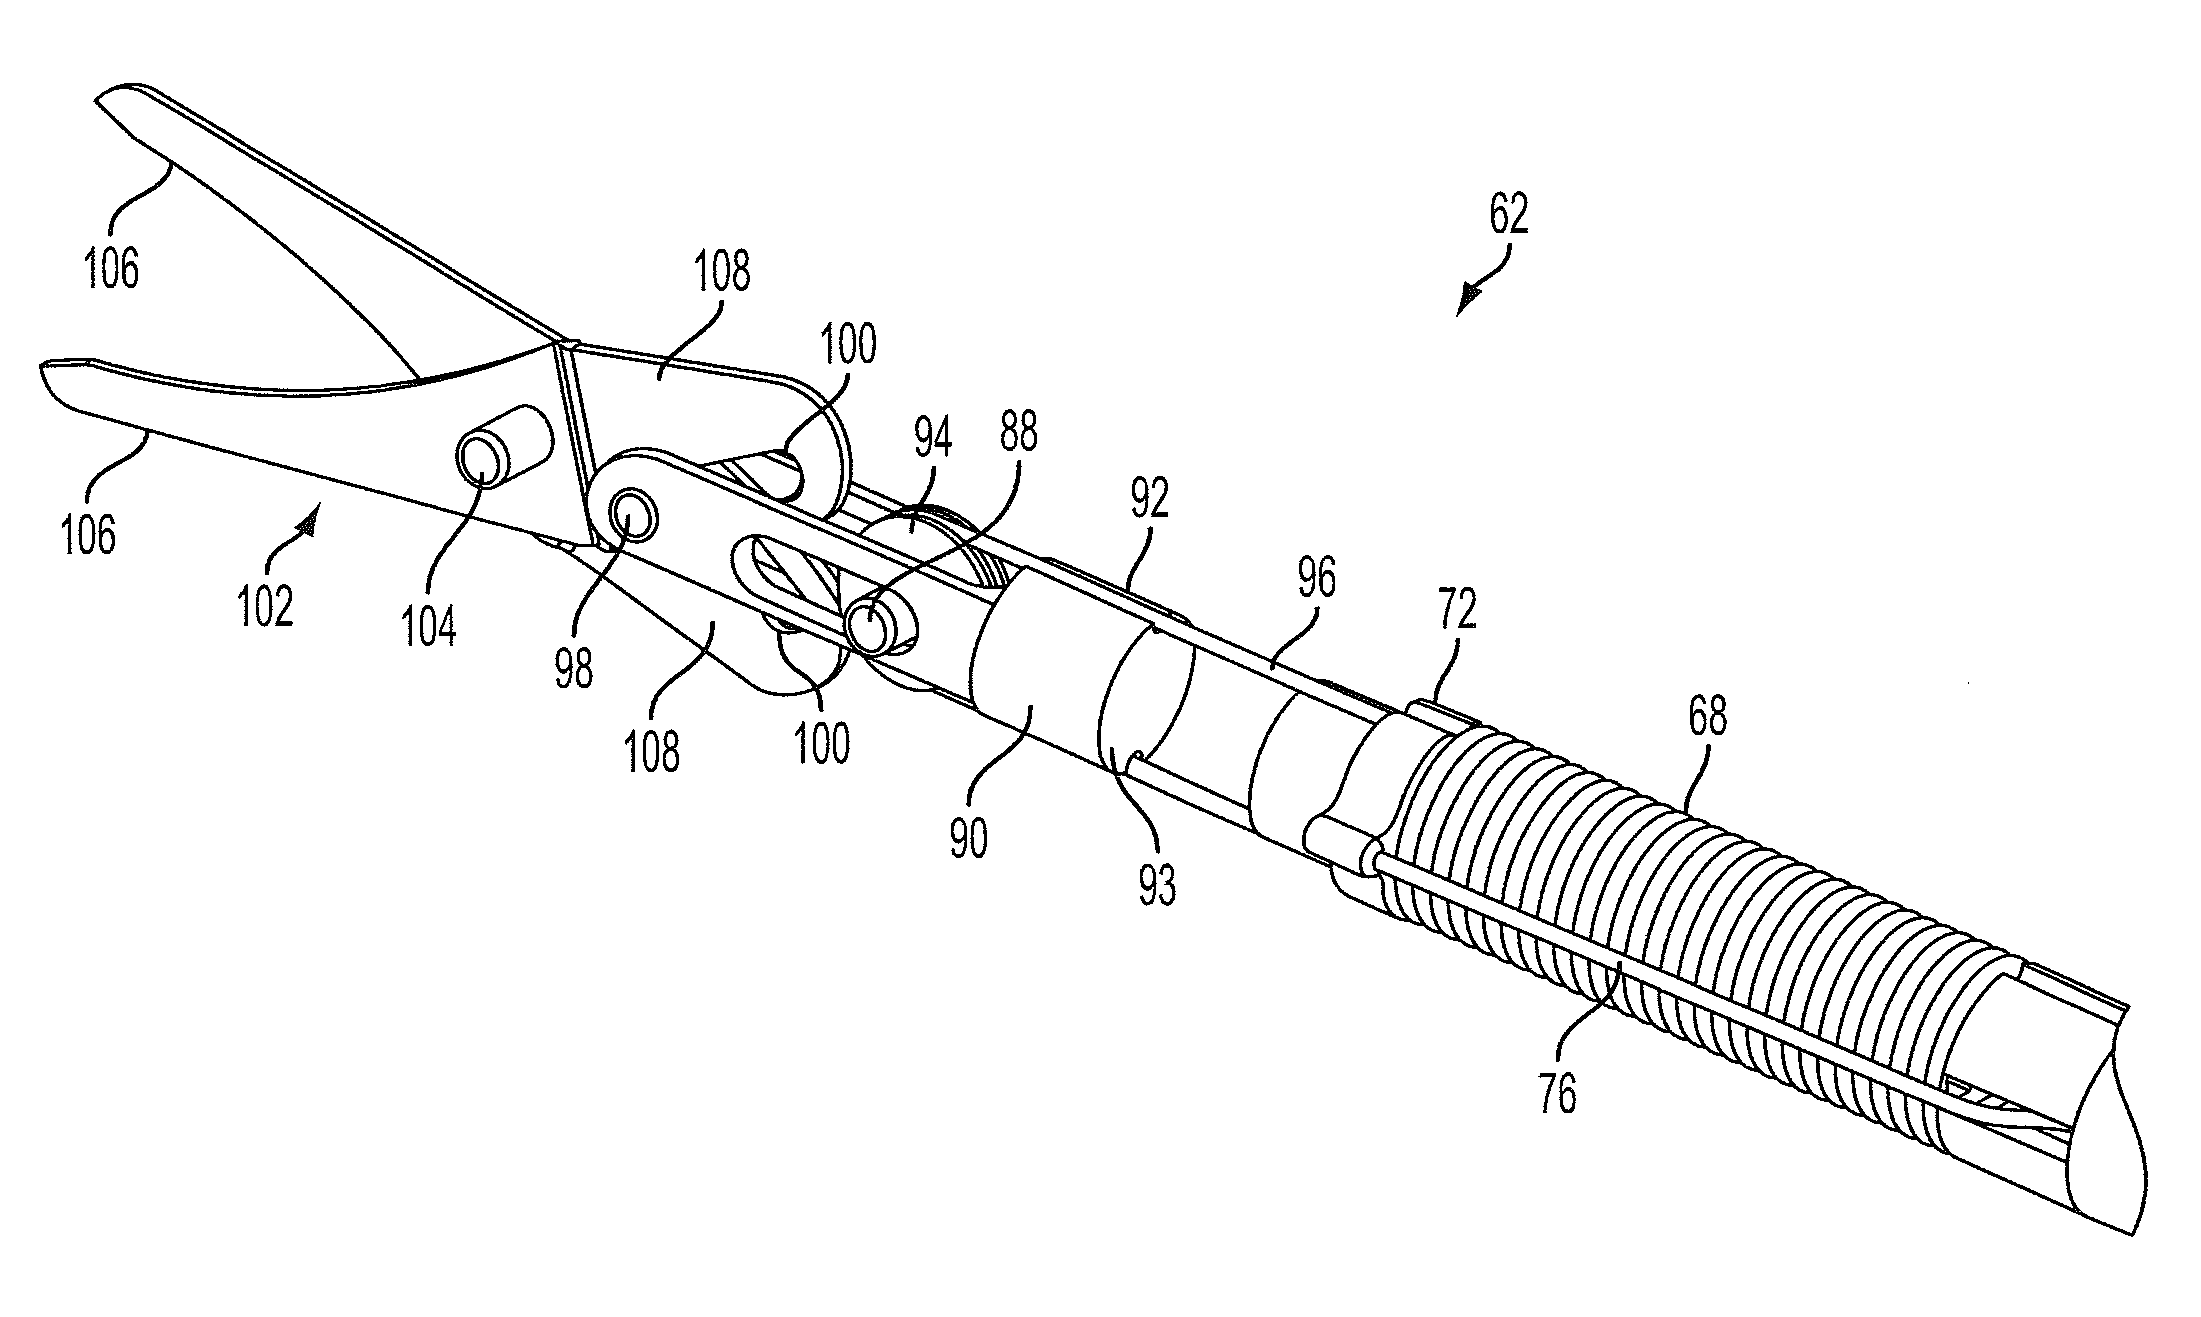 Surgical tool and method of operation